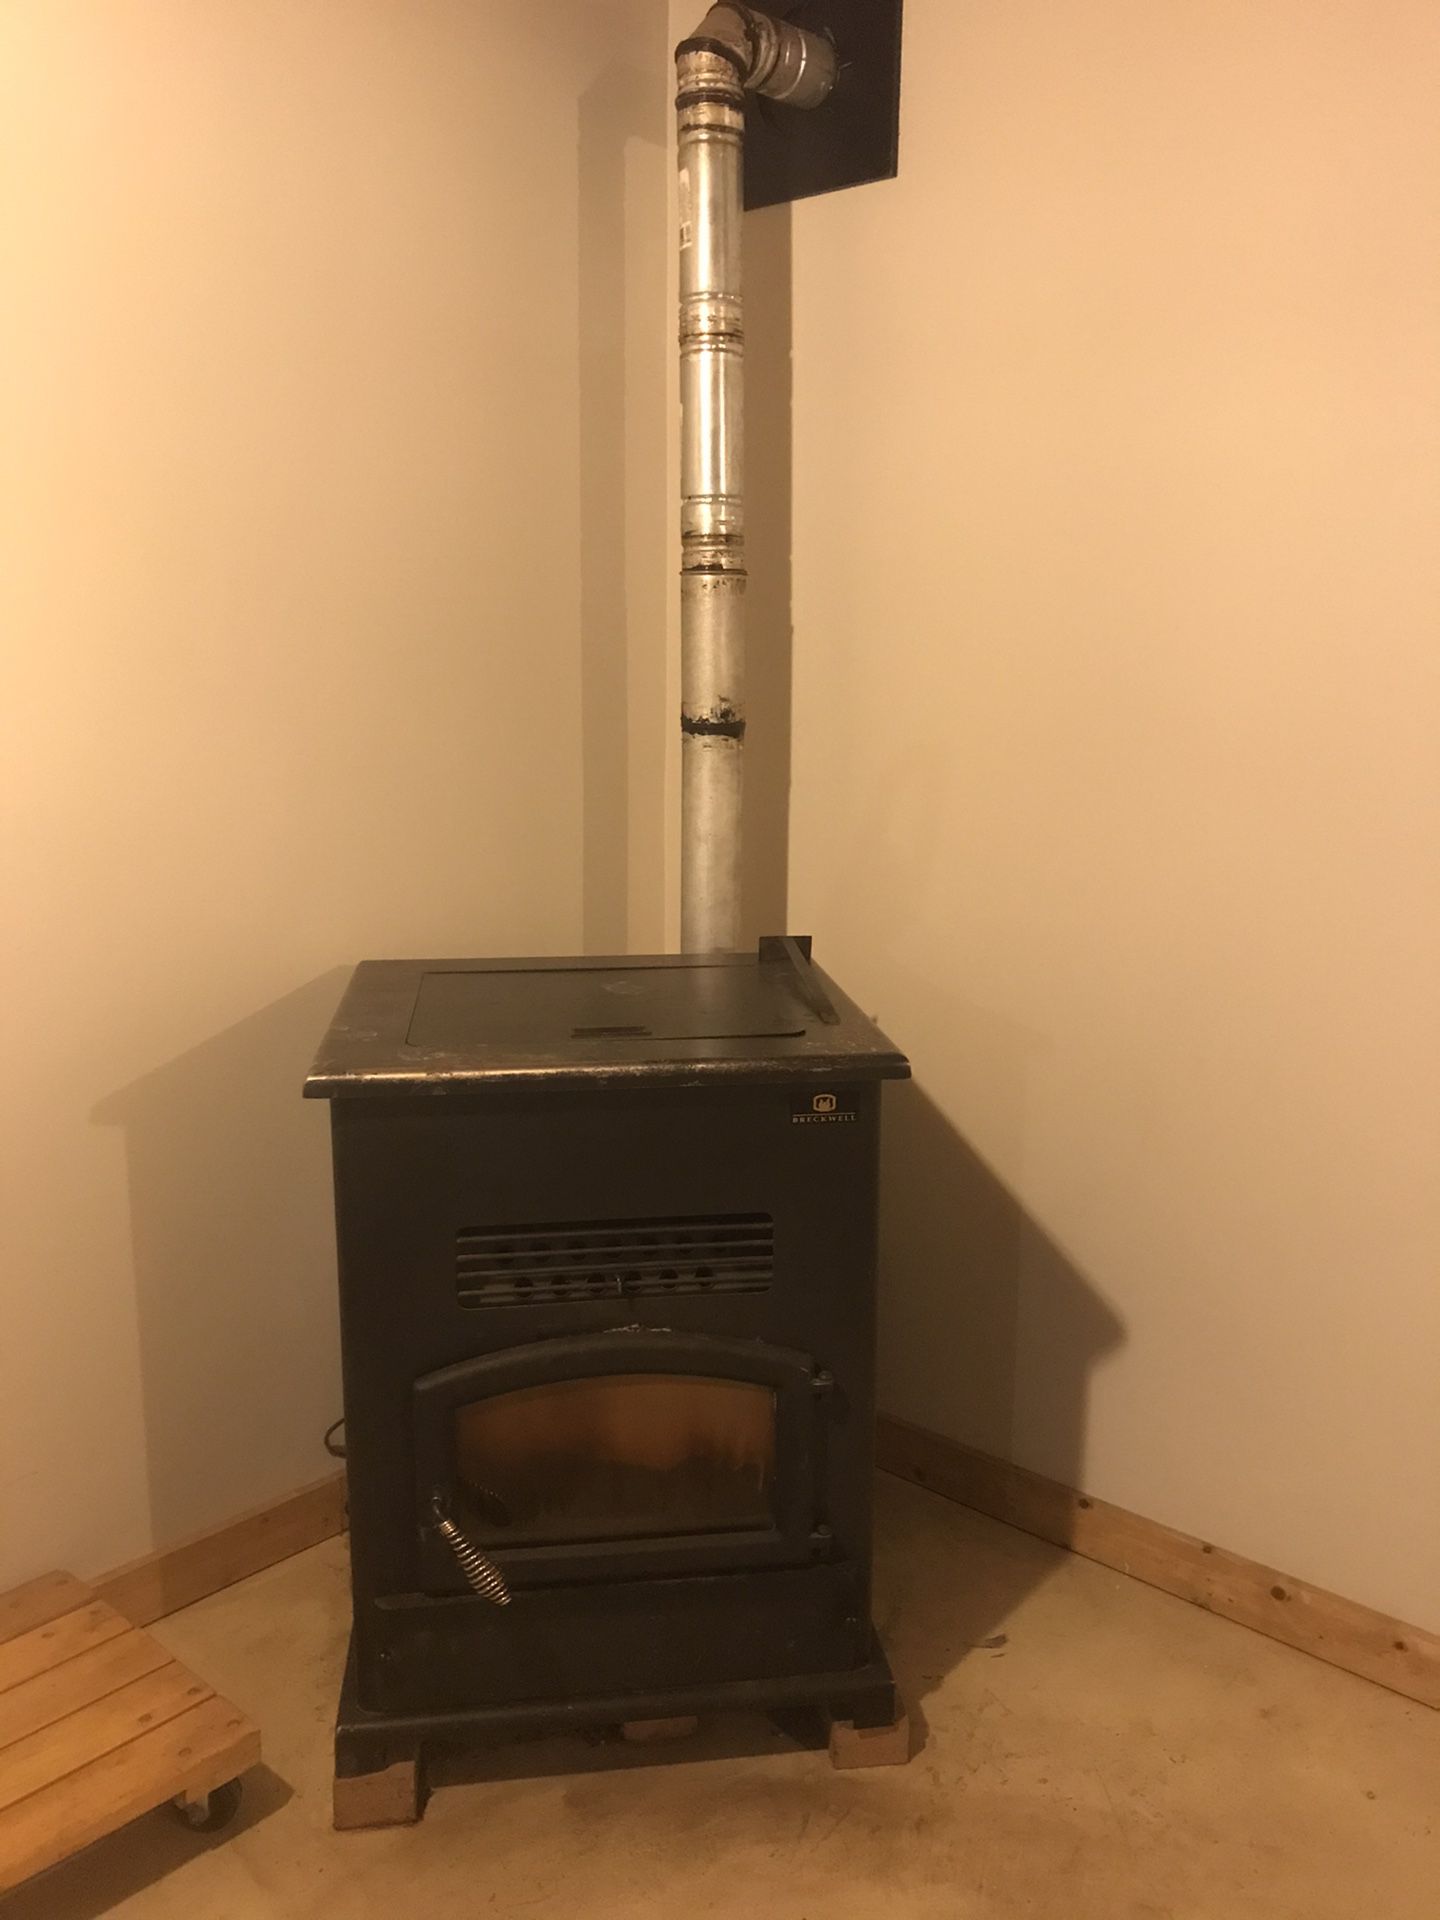 Pellet Stove- Breckwell Big E Home Furnace